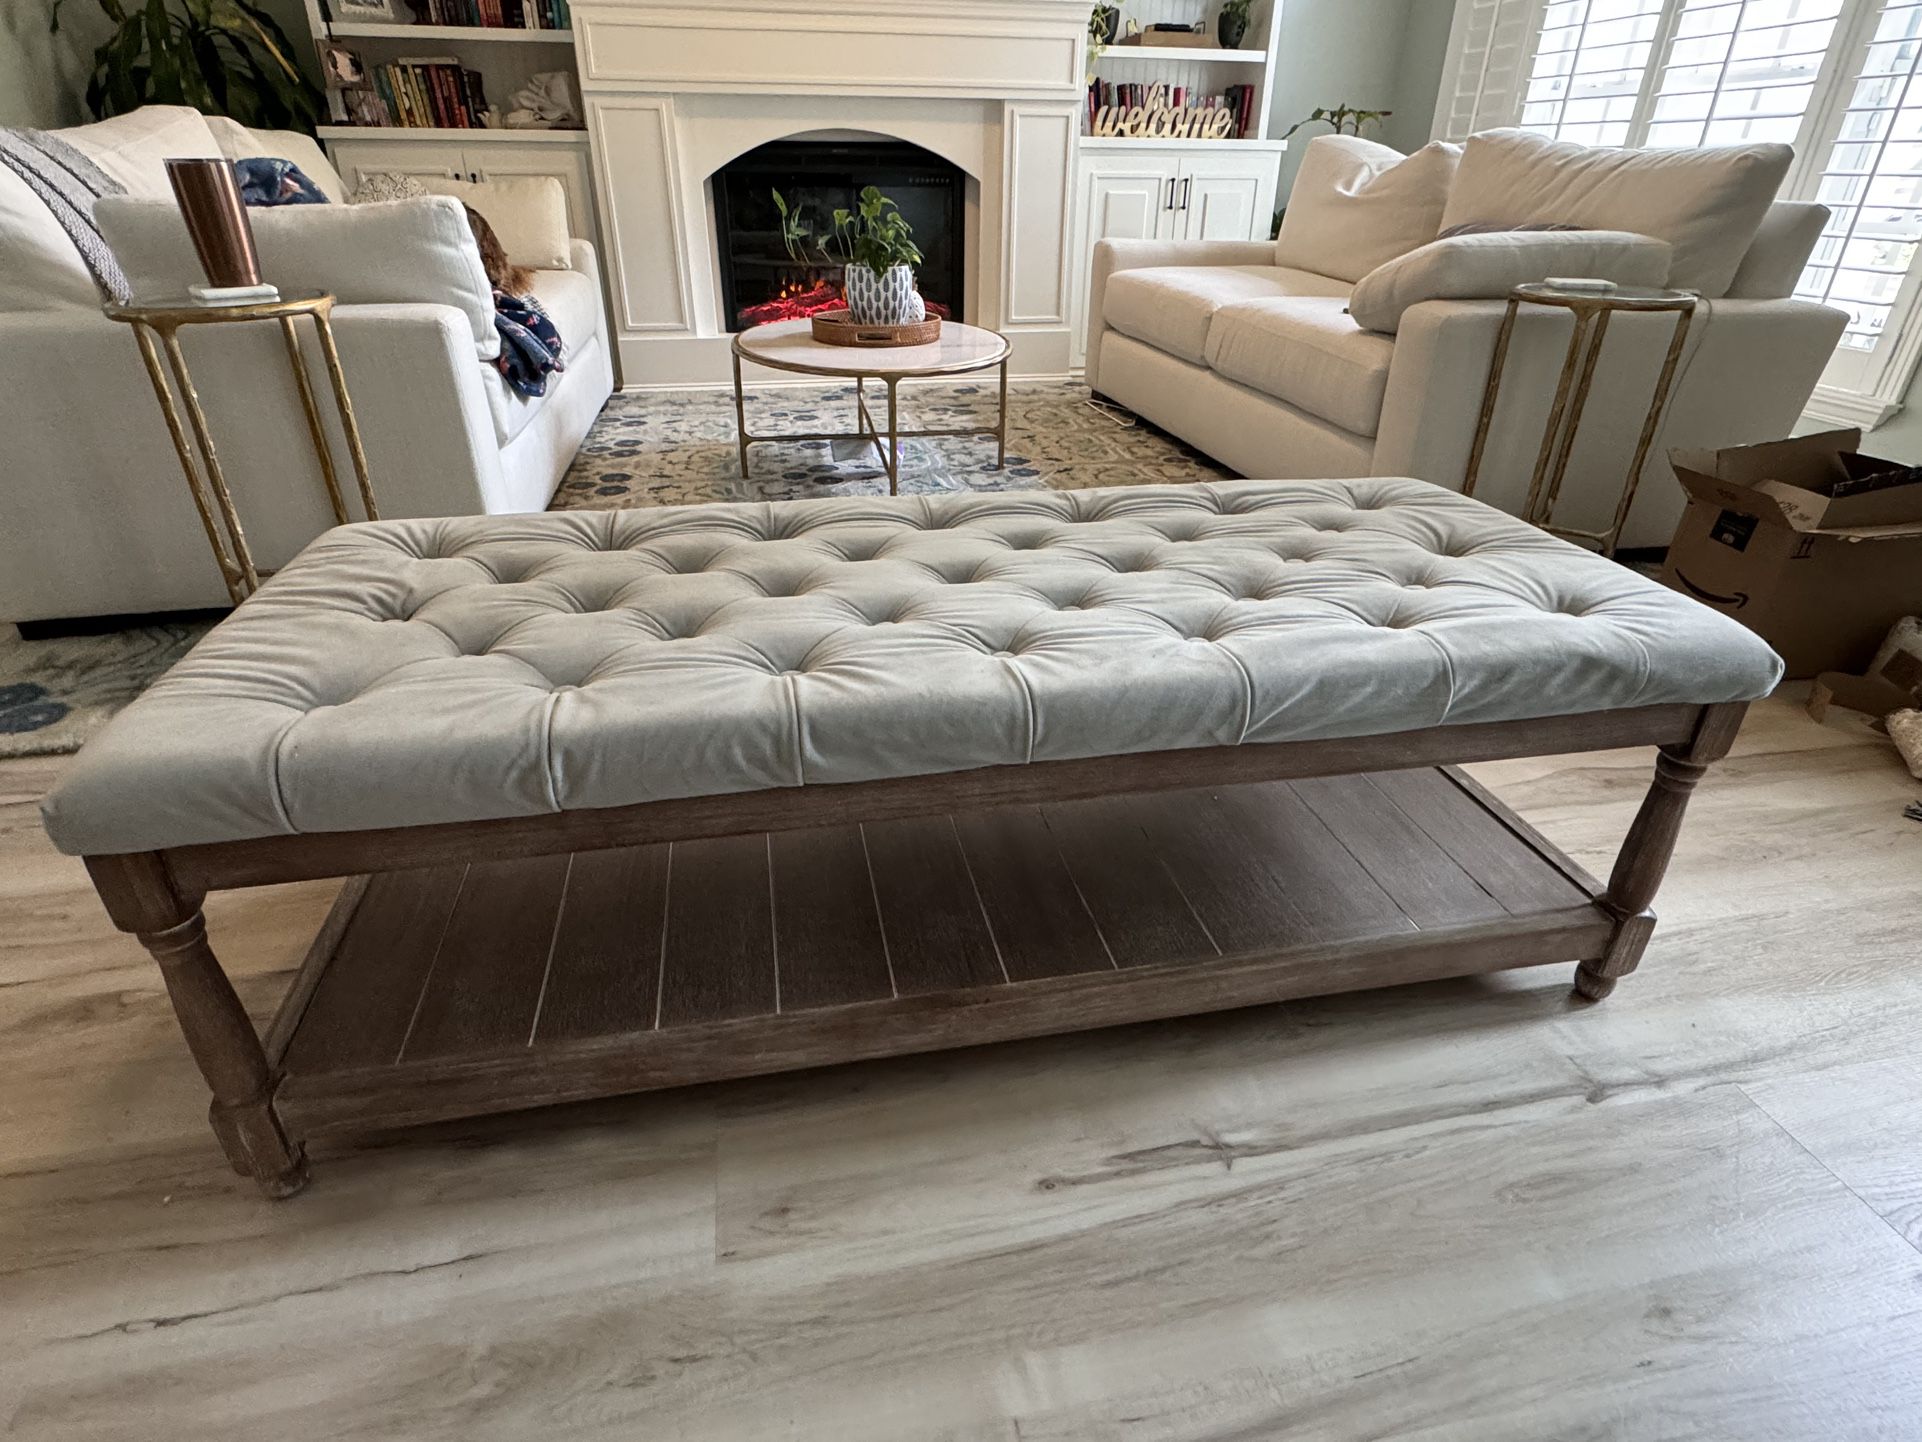 Excellent Condition Tufted Bench Or Coffee Table